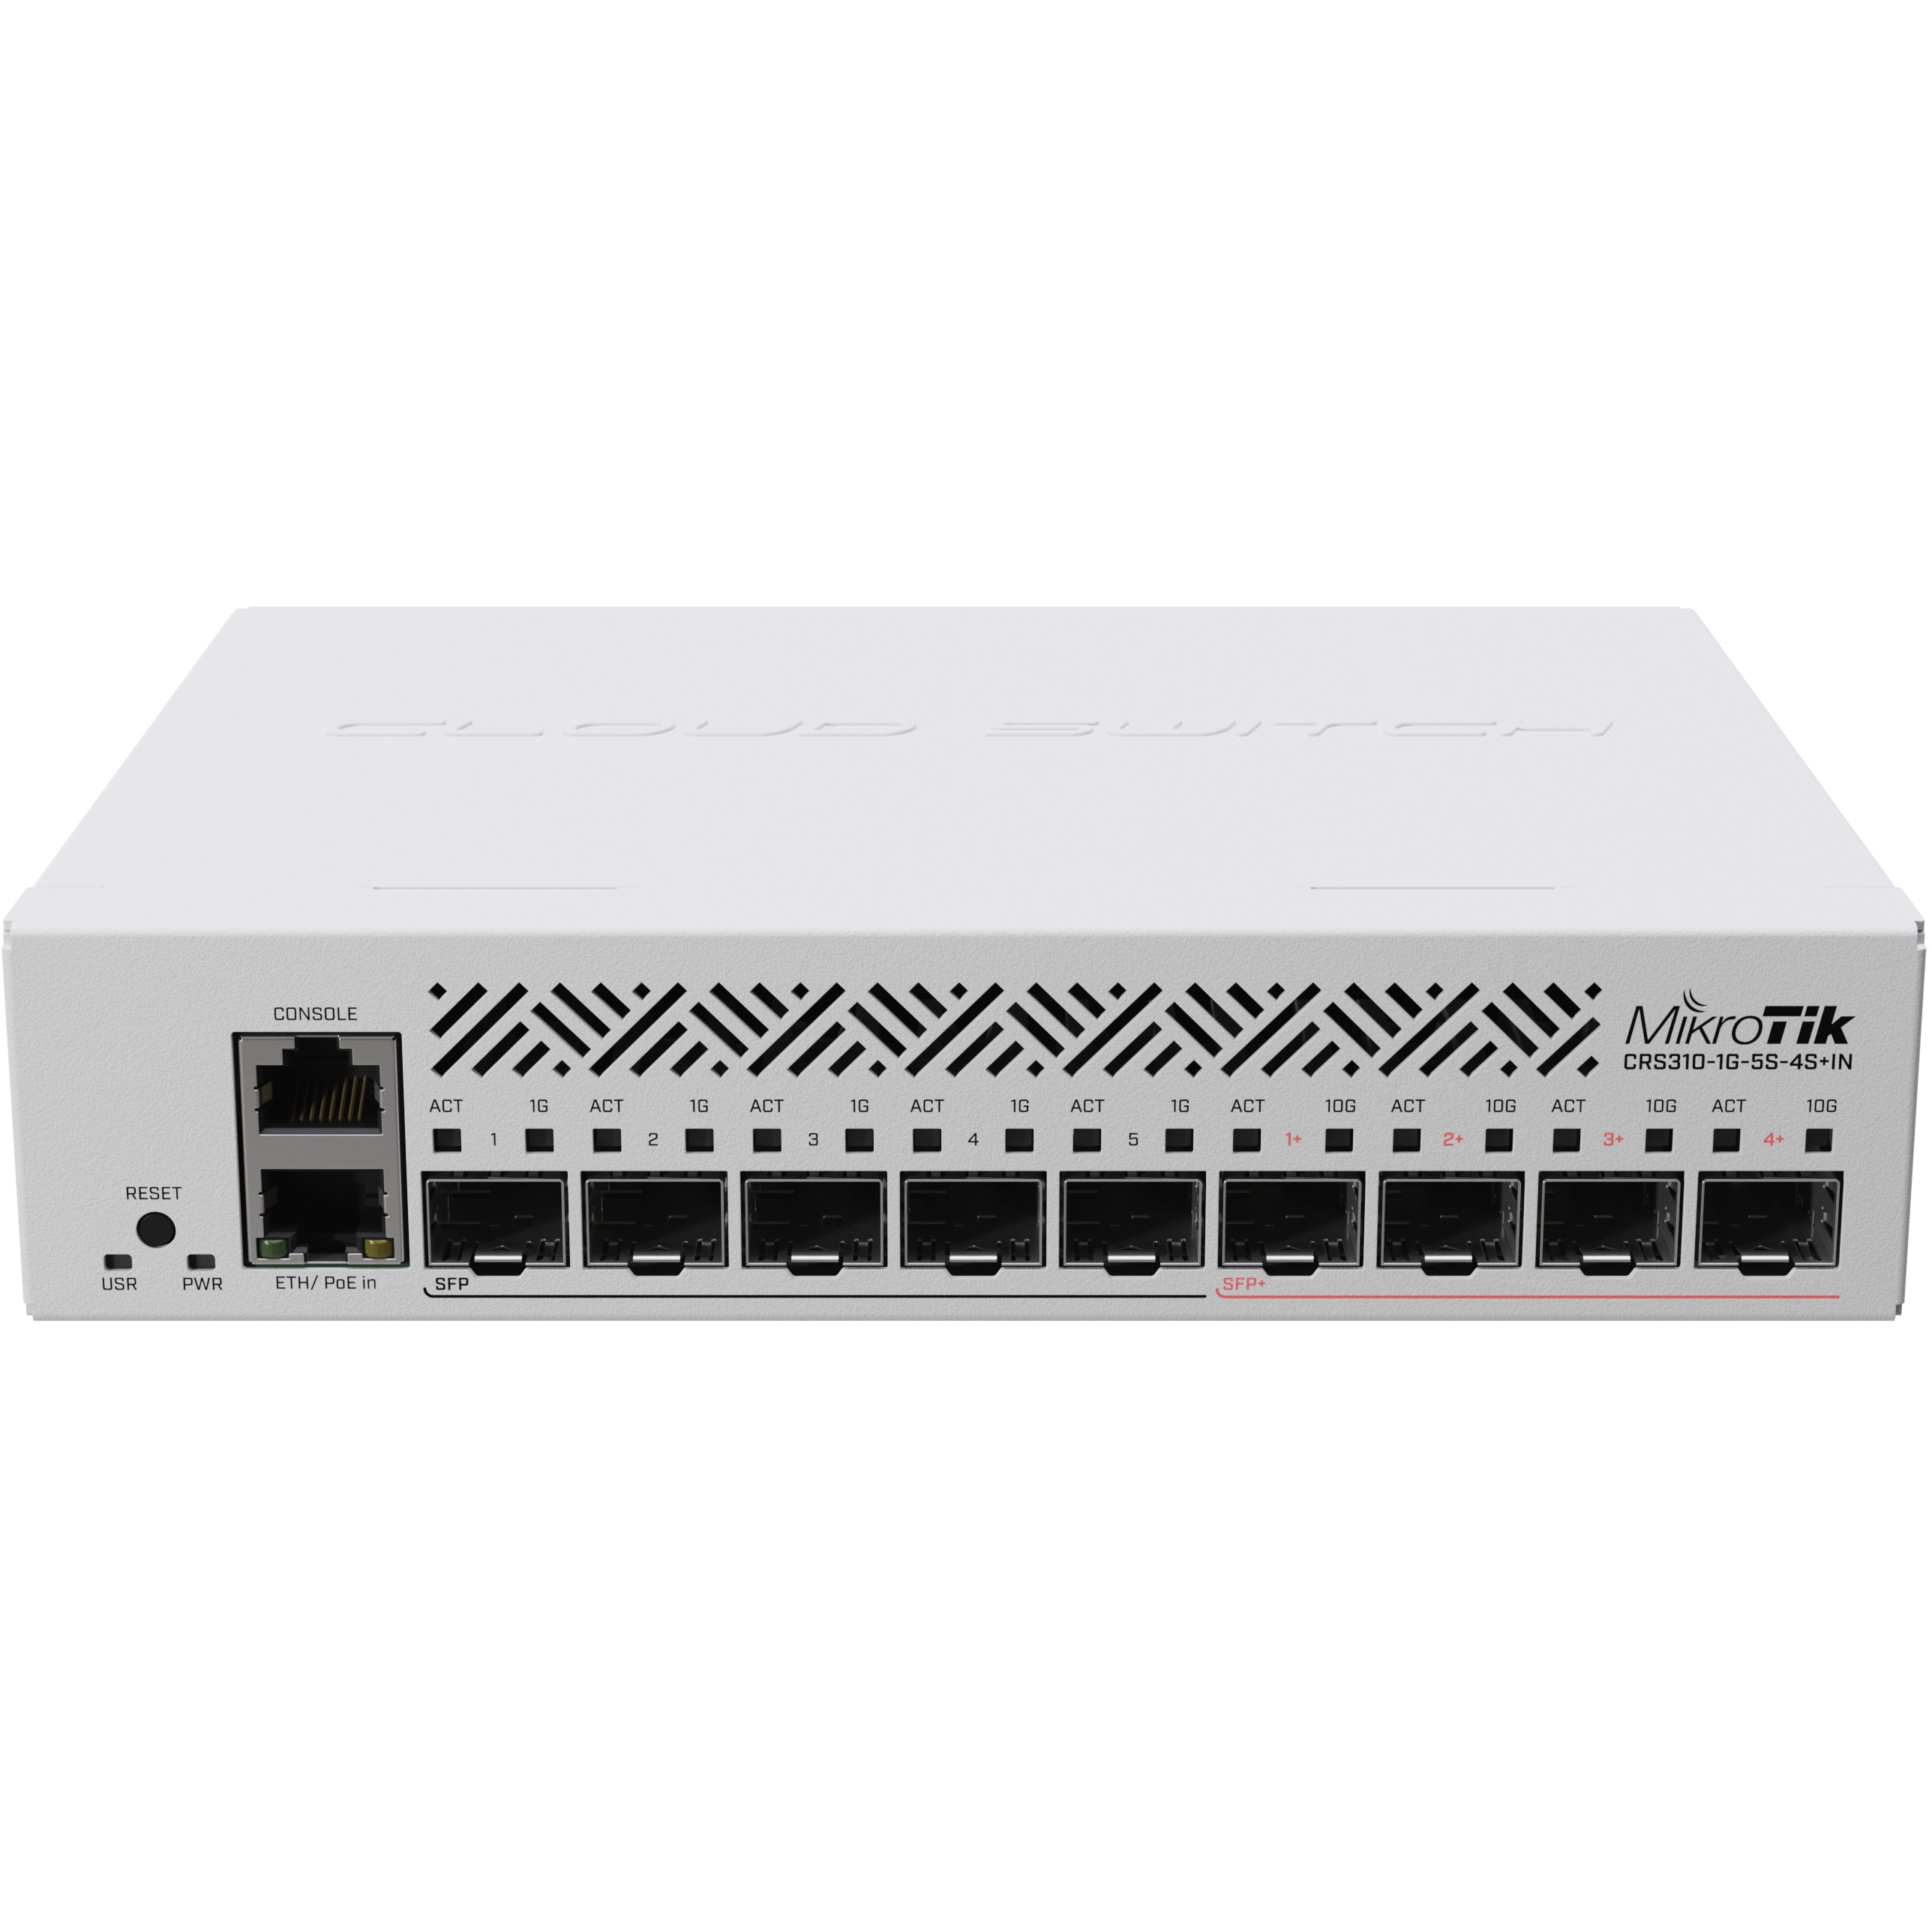 switch CRS310-1G-5S-4S+IN Hubs Mikrotik MIKROTIK Switching Netzwerk Router network 2